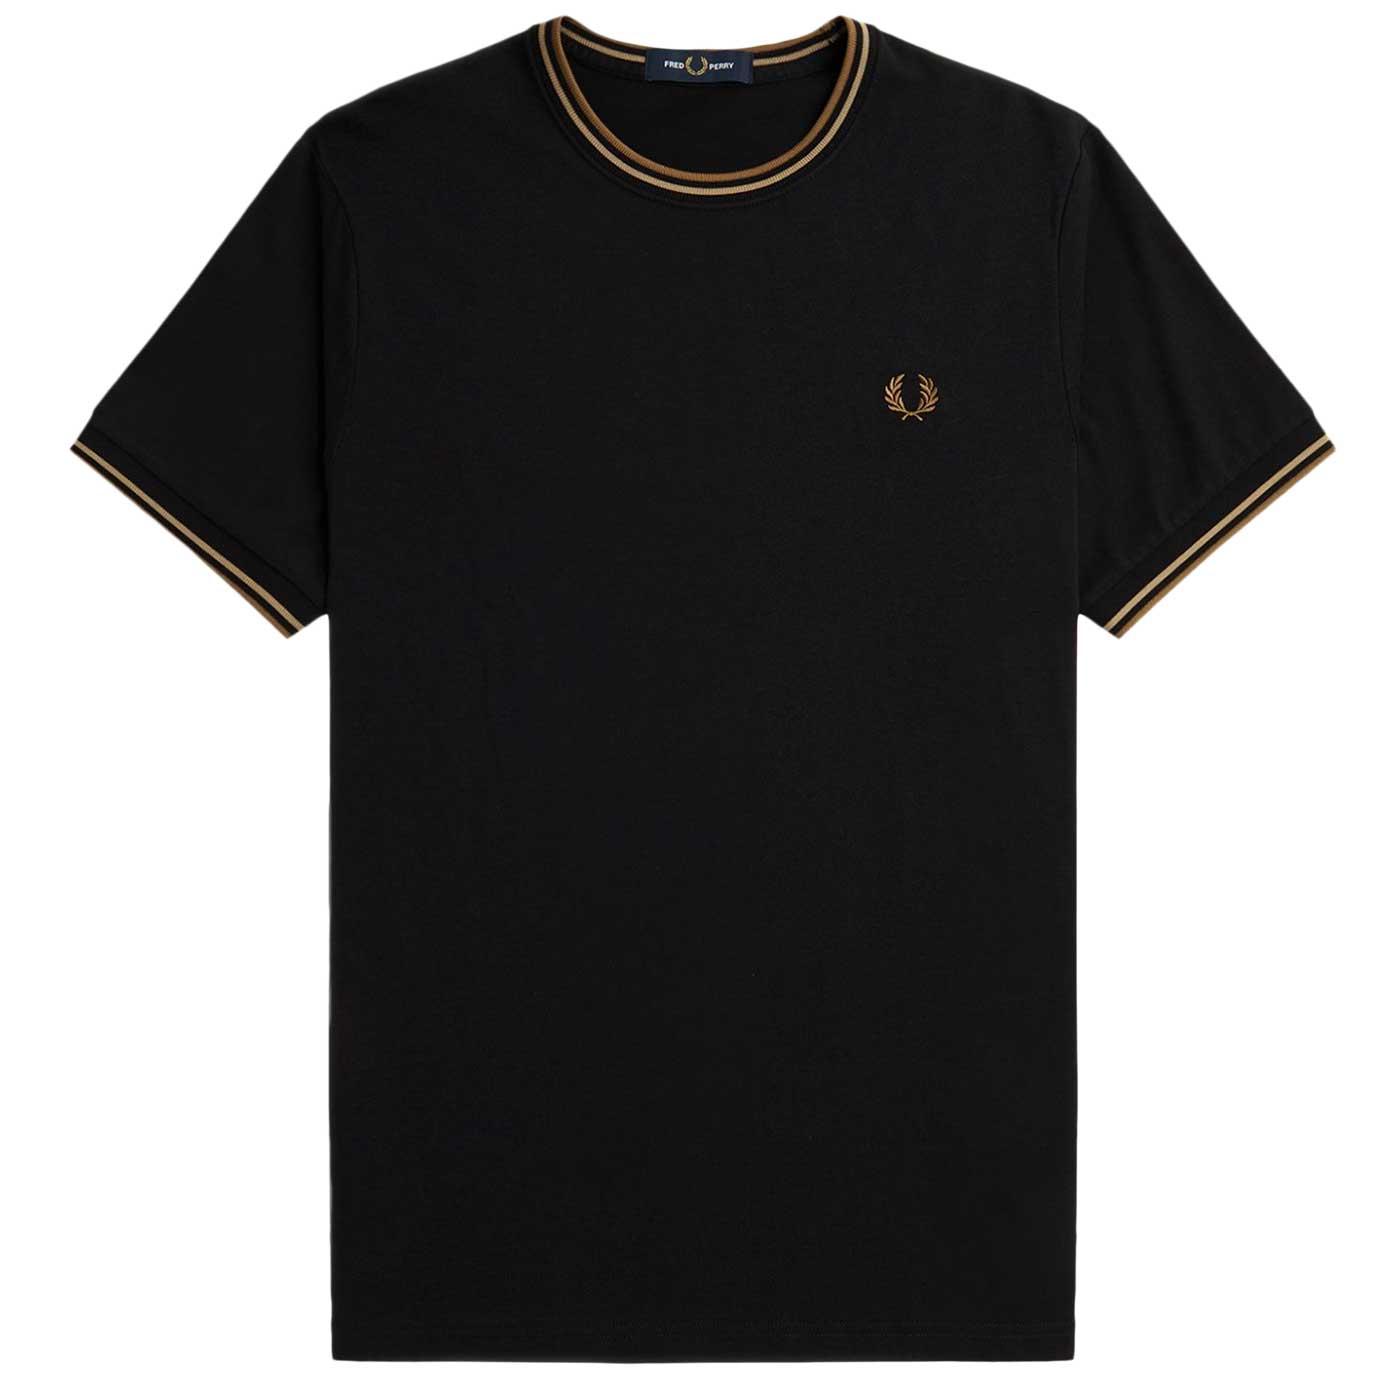 FRED PERRY M1588 Mod Twin Tipped T-Shirt Black